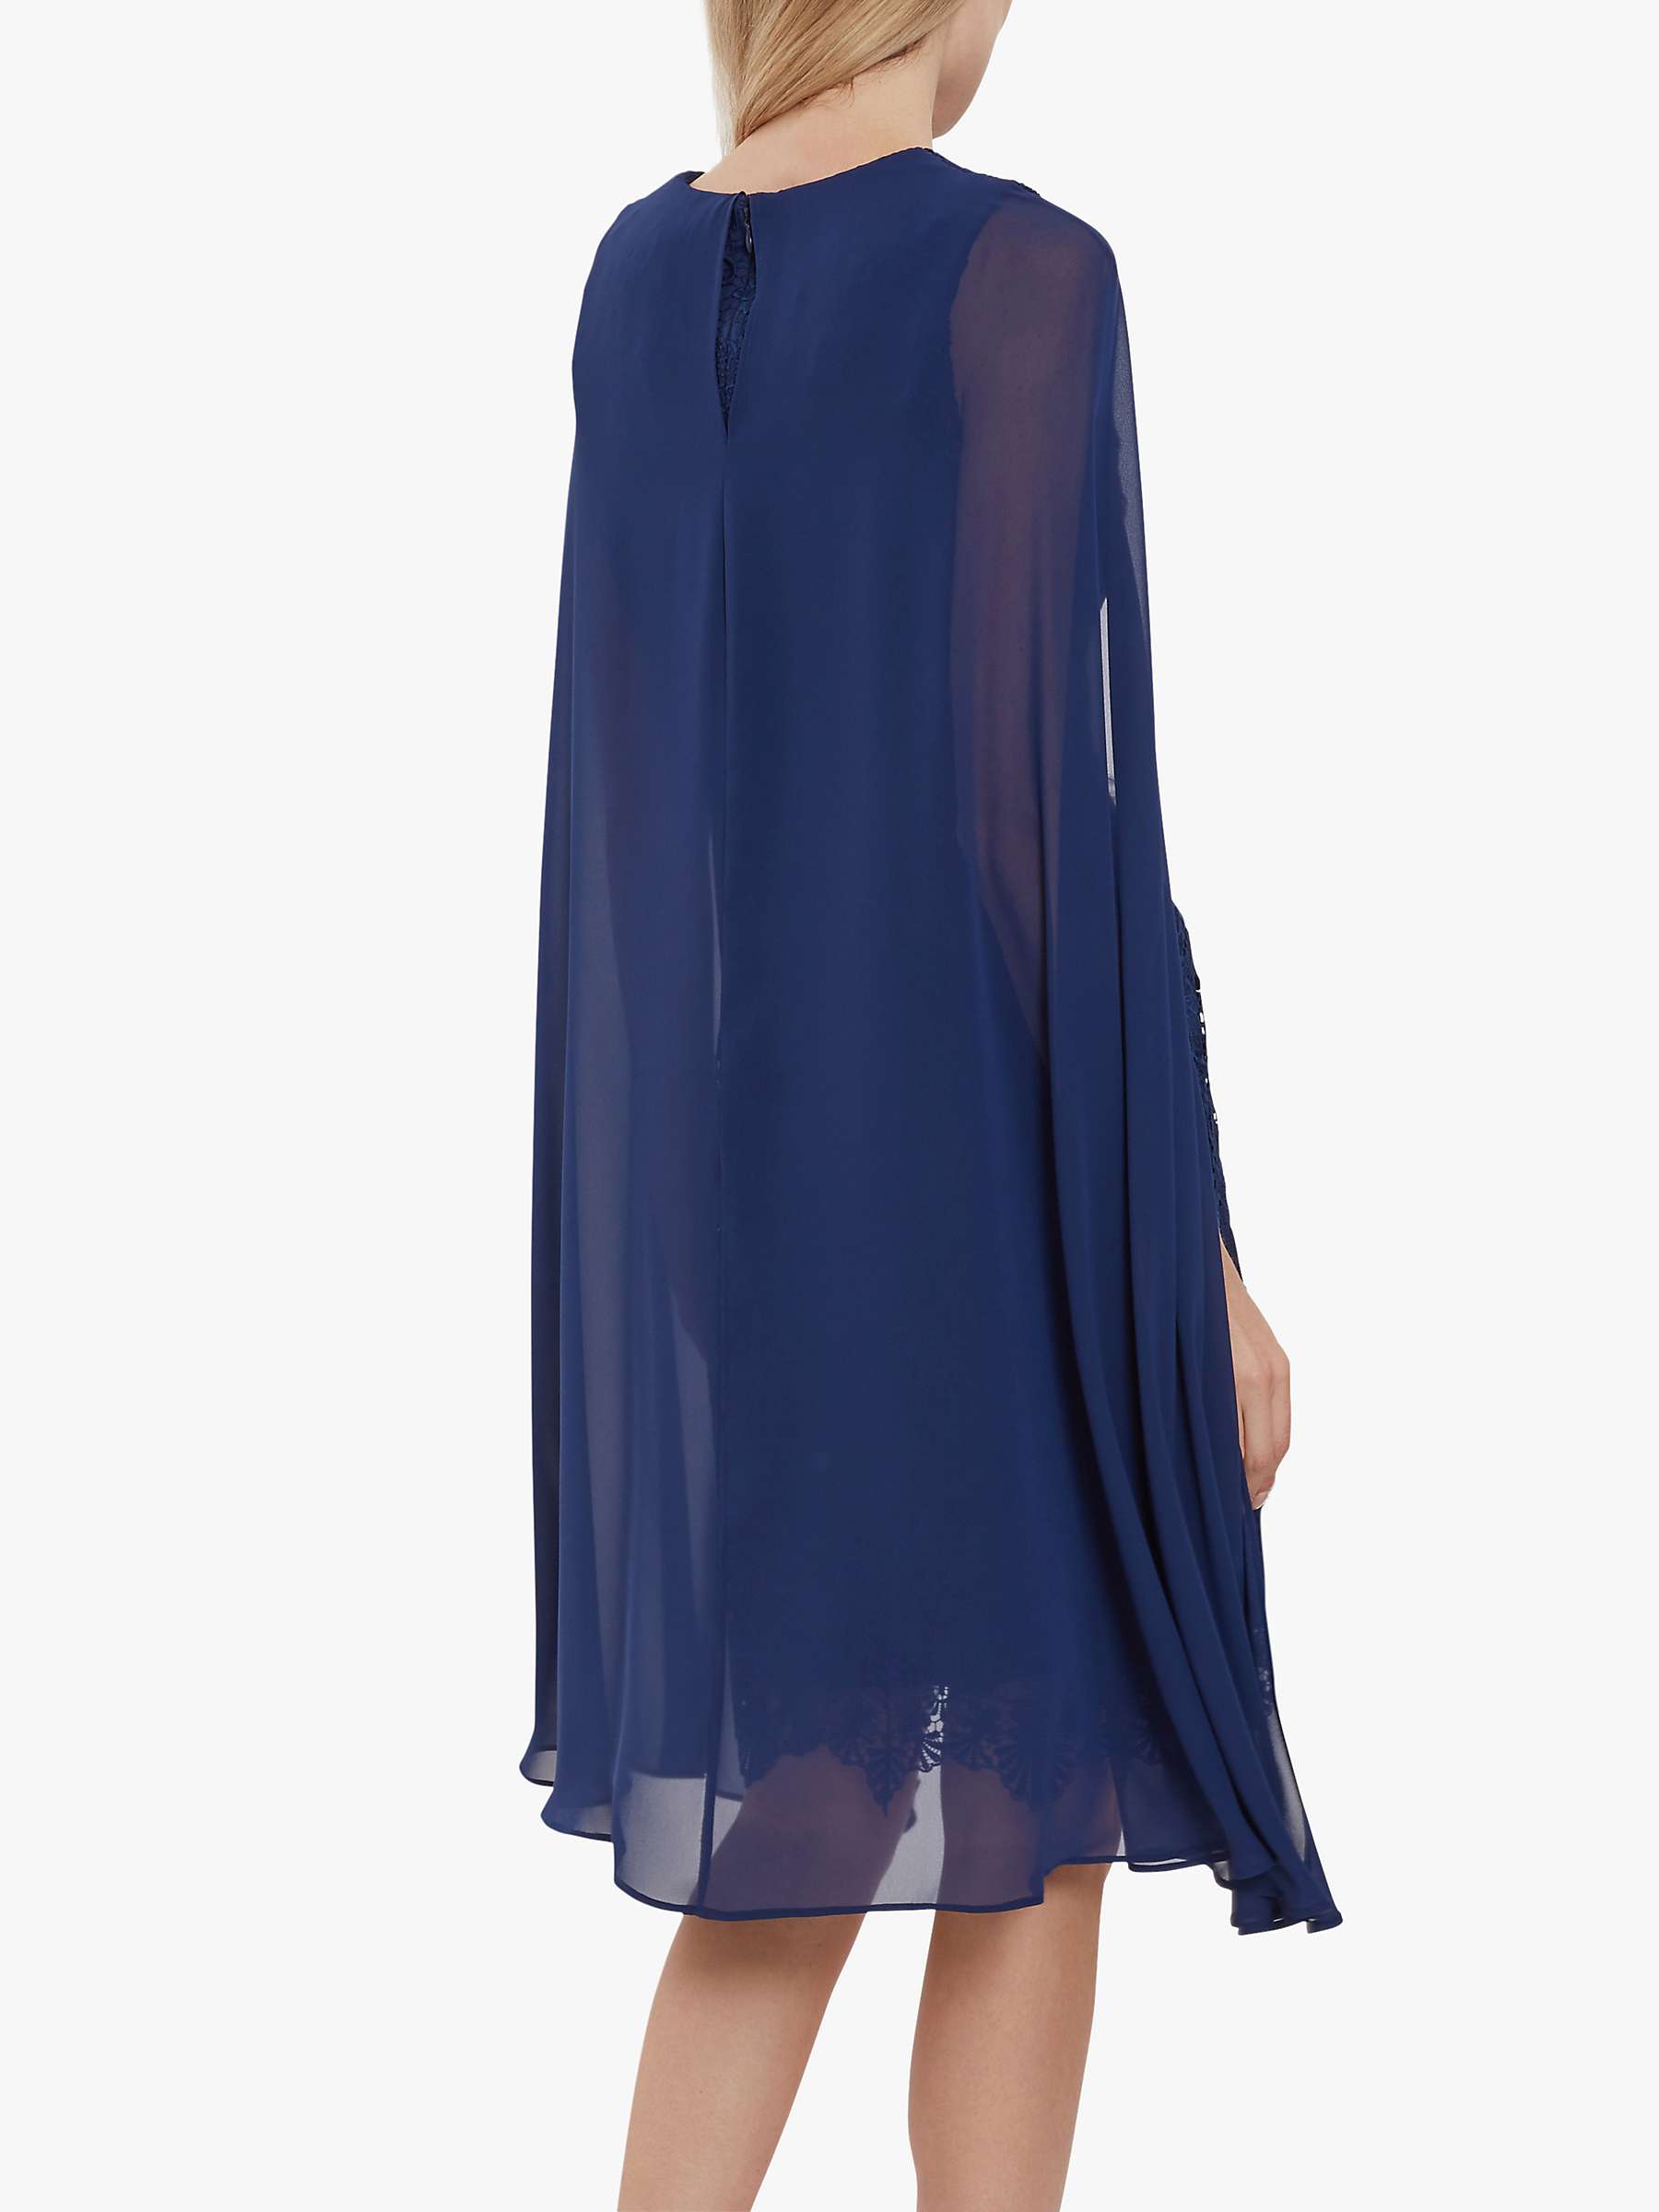 Buy Gina Bacconi Sansa Dress with Cape Online at johnlewis.com